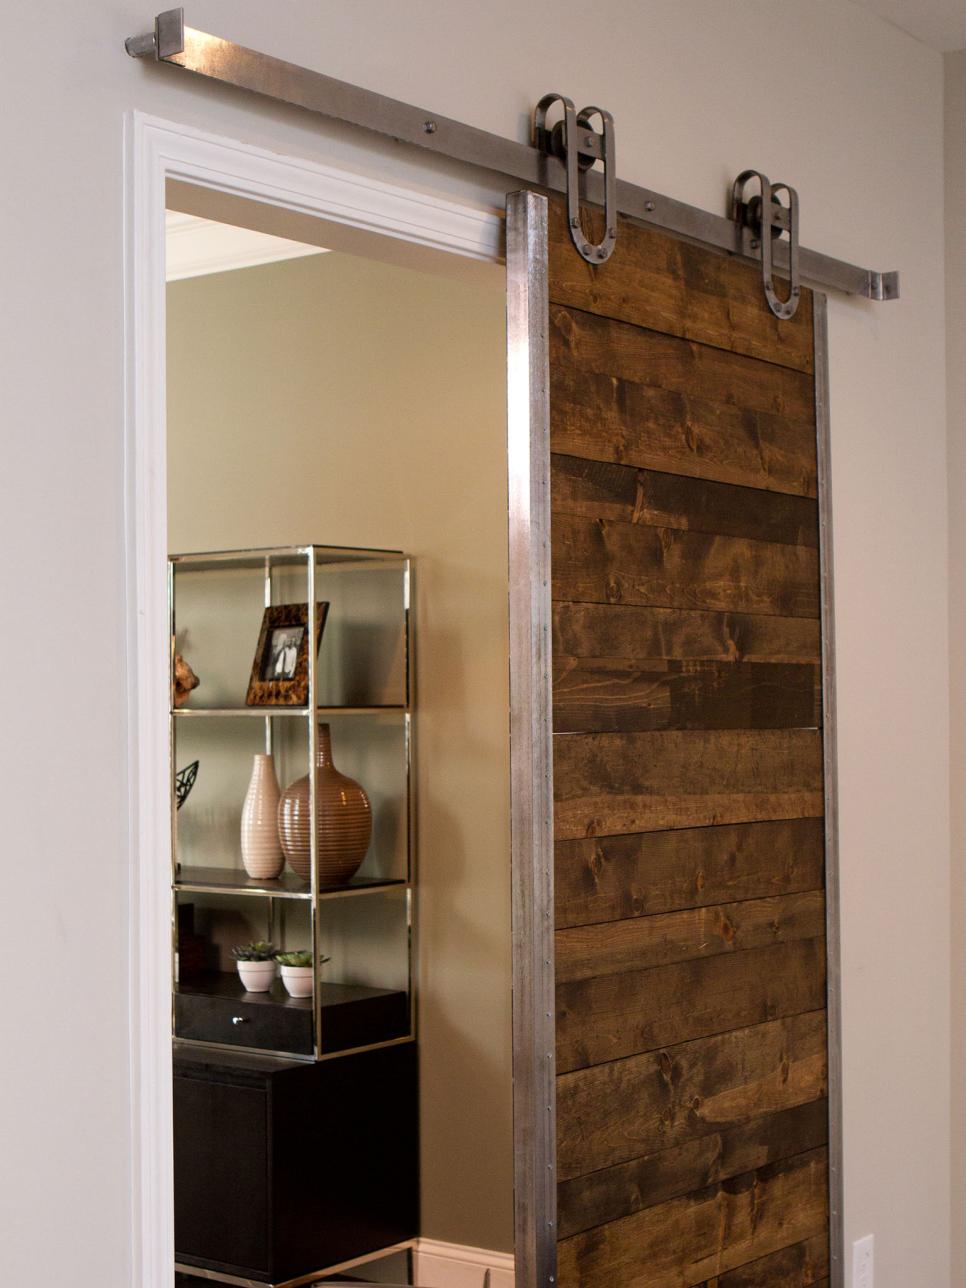 Repurposed Barn Door Gives Privacy to Home Office | HGTV